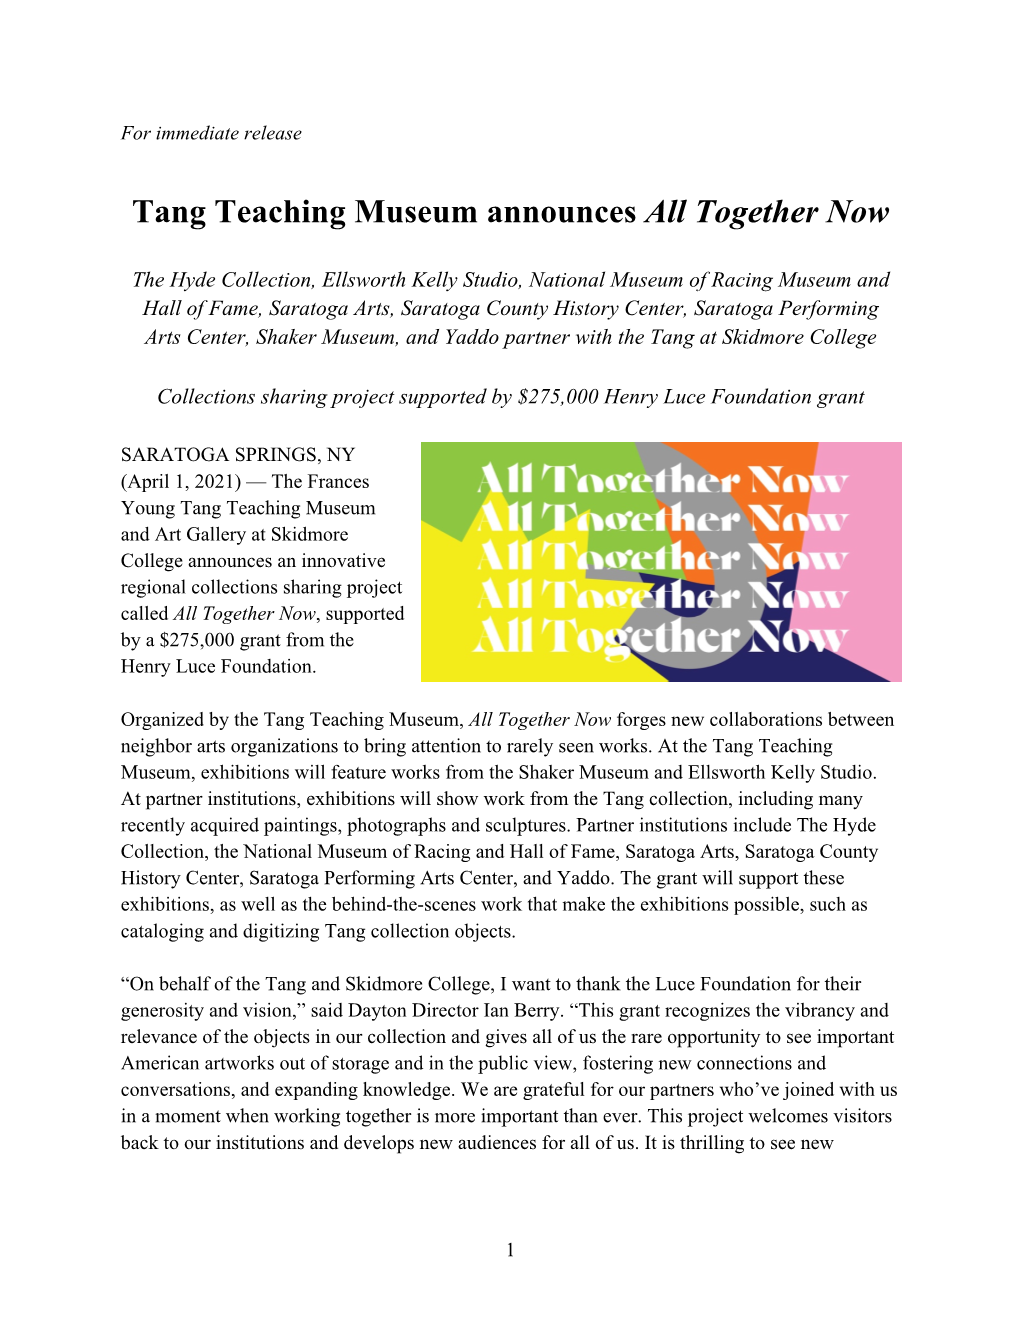 Tang Teaching Museum Announces All Together Now